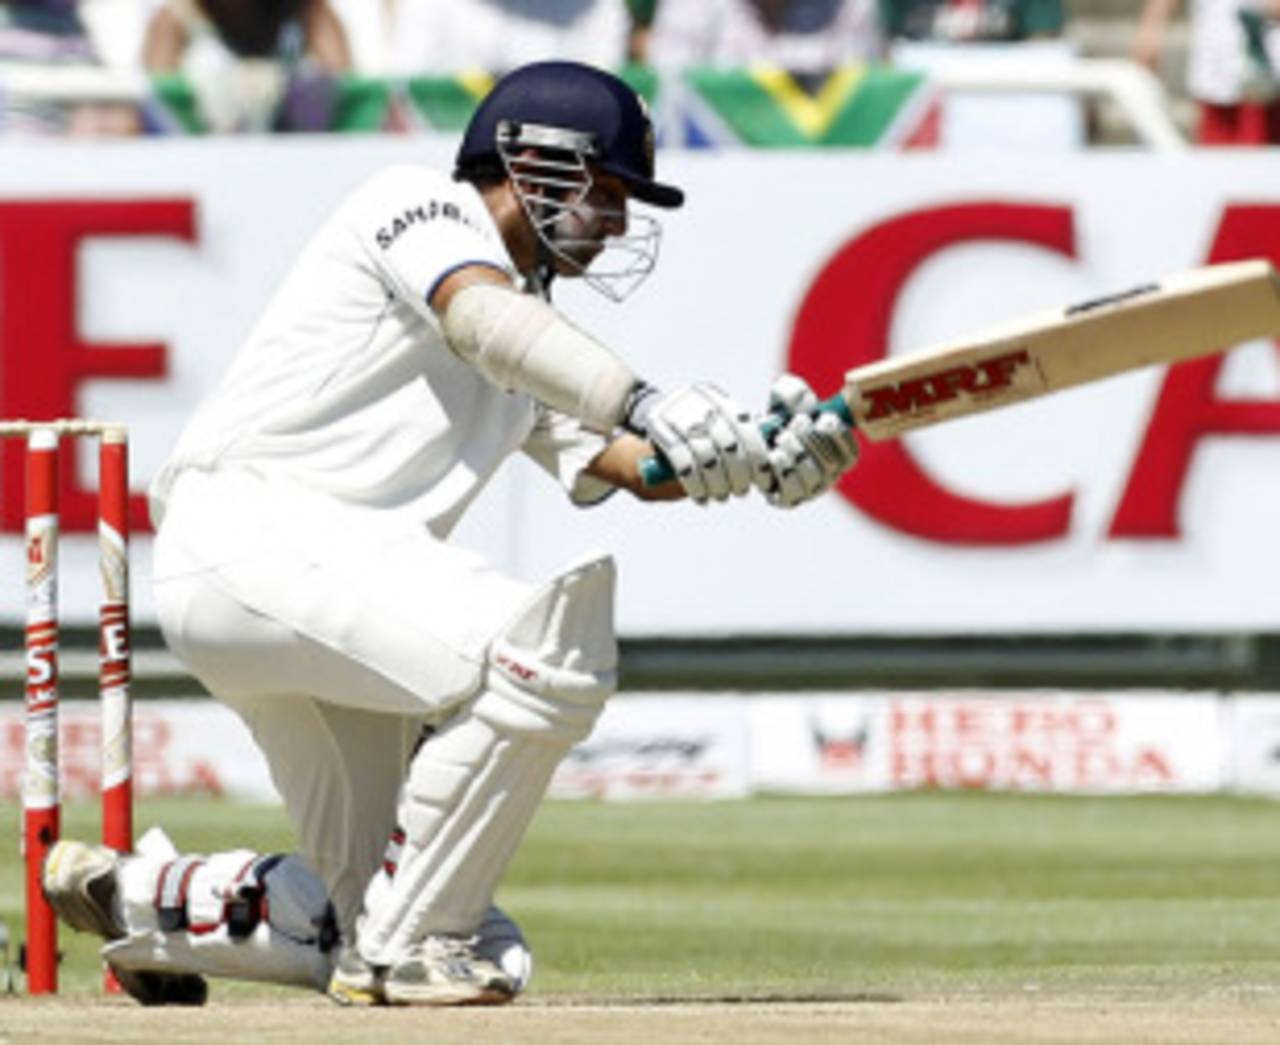 Gautam Gambhir leaves a ball from Morne Morkel, South Africa v India, 3rd Test, Cape Town, 3rd day, January 4, 2011